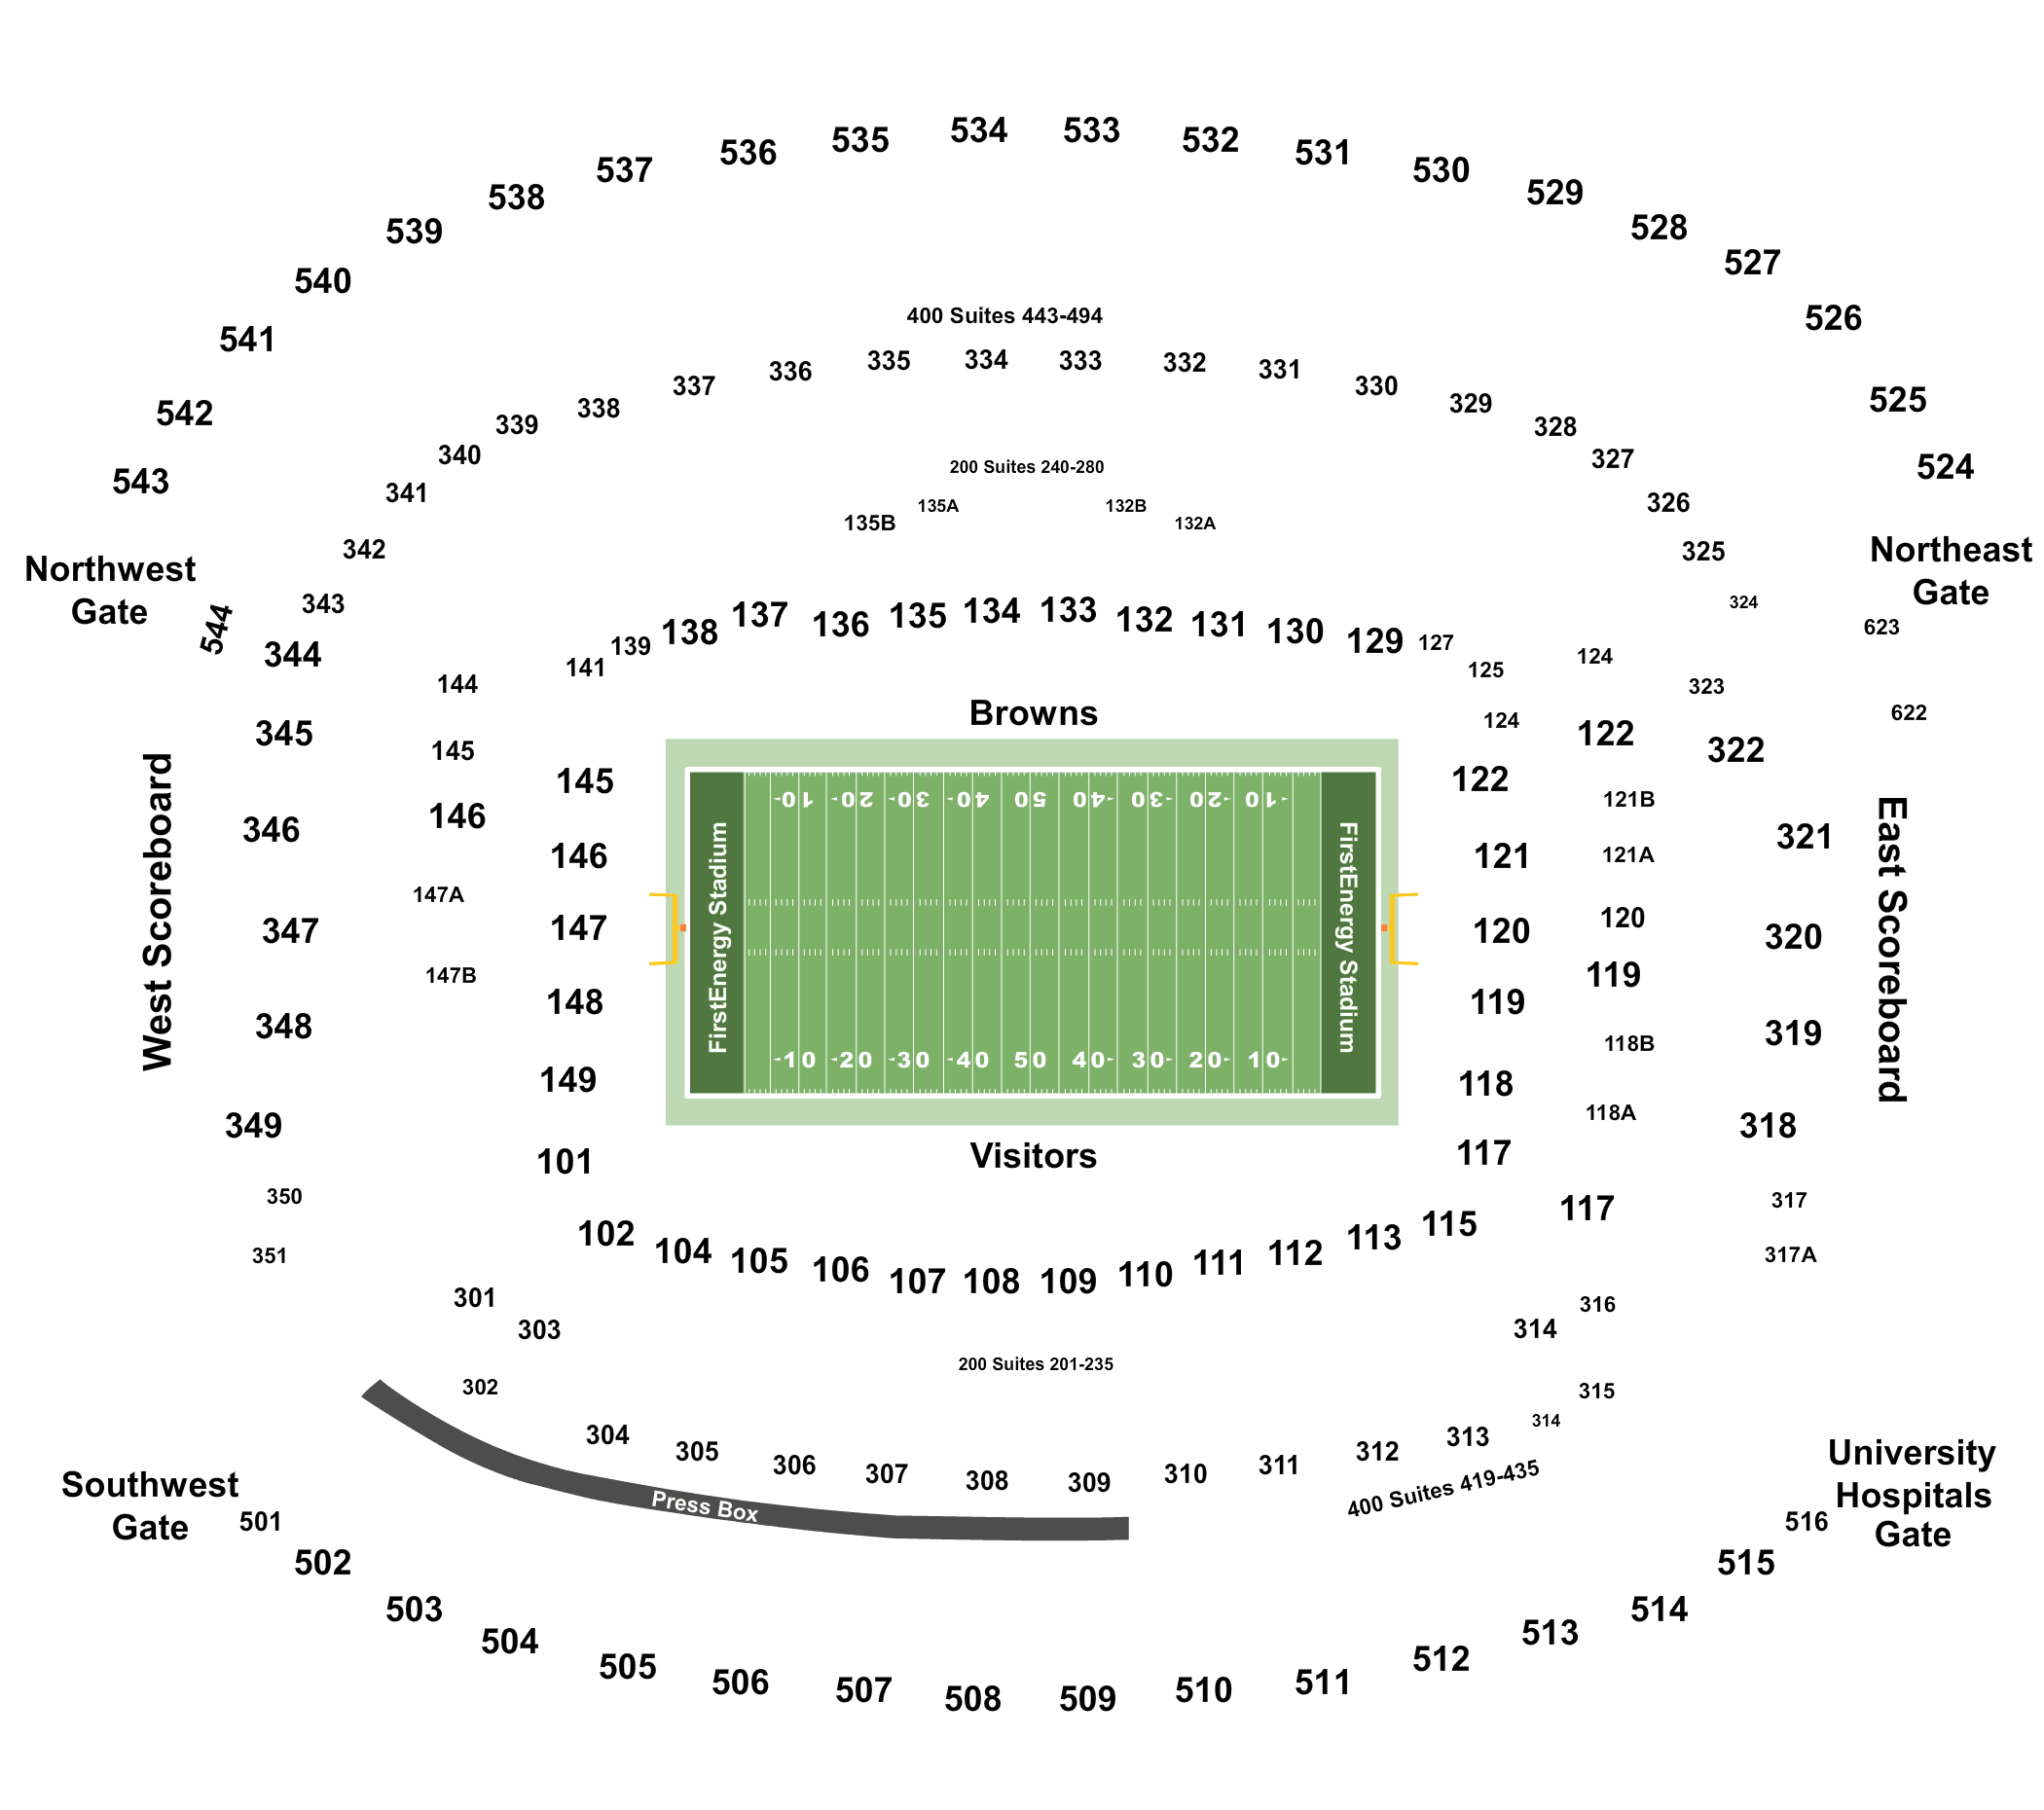 cleveland browns military tickets